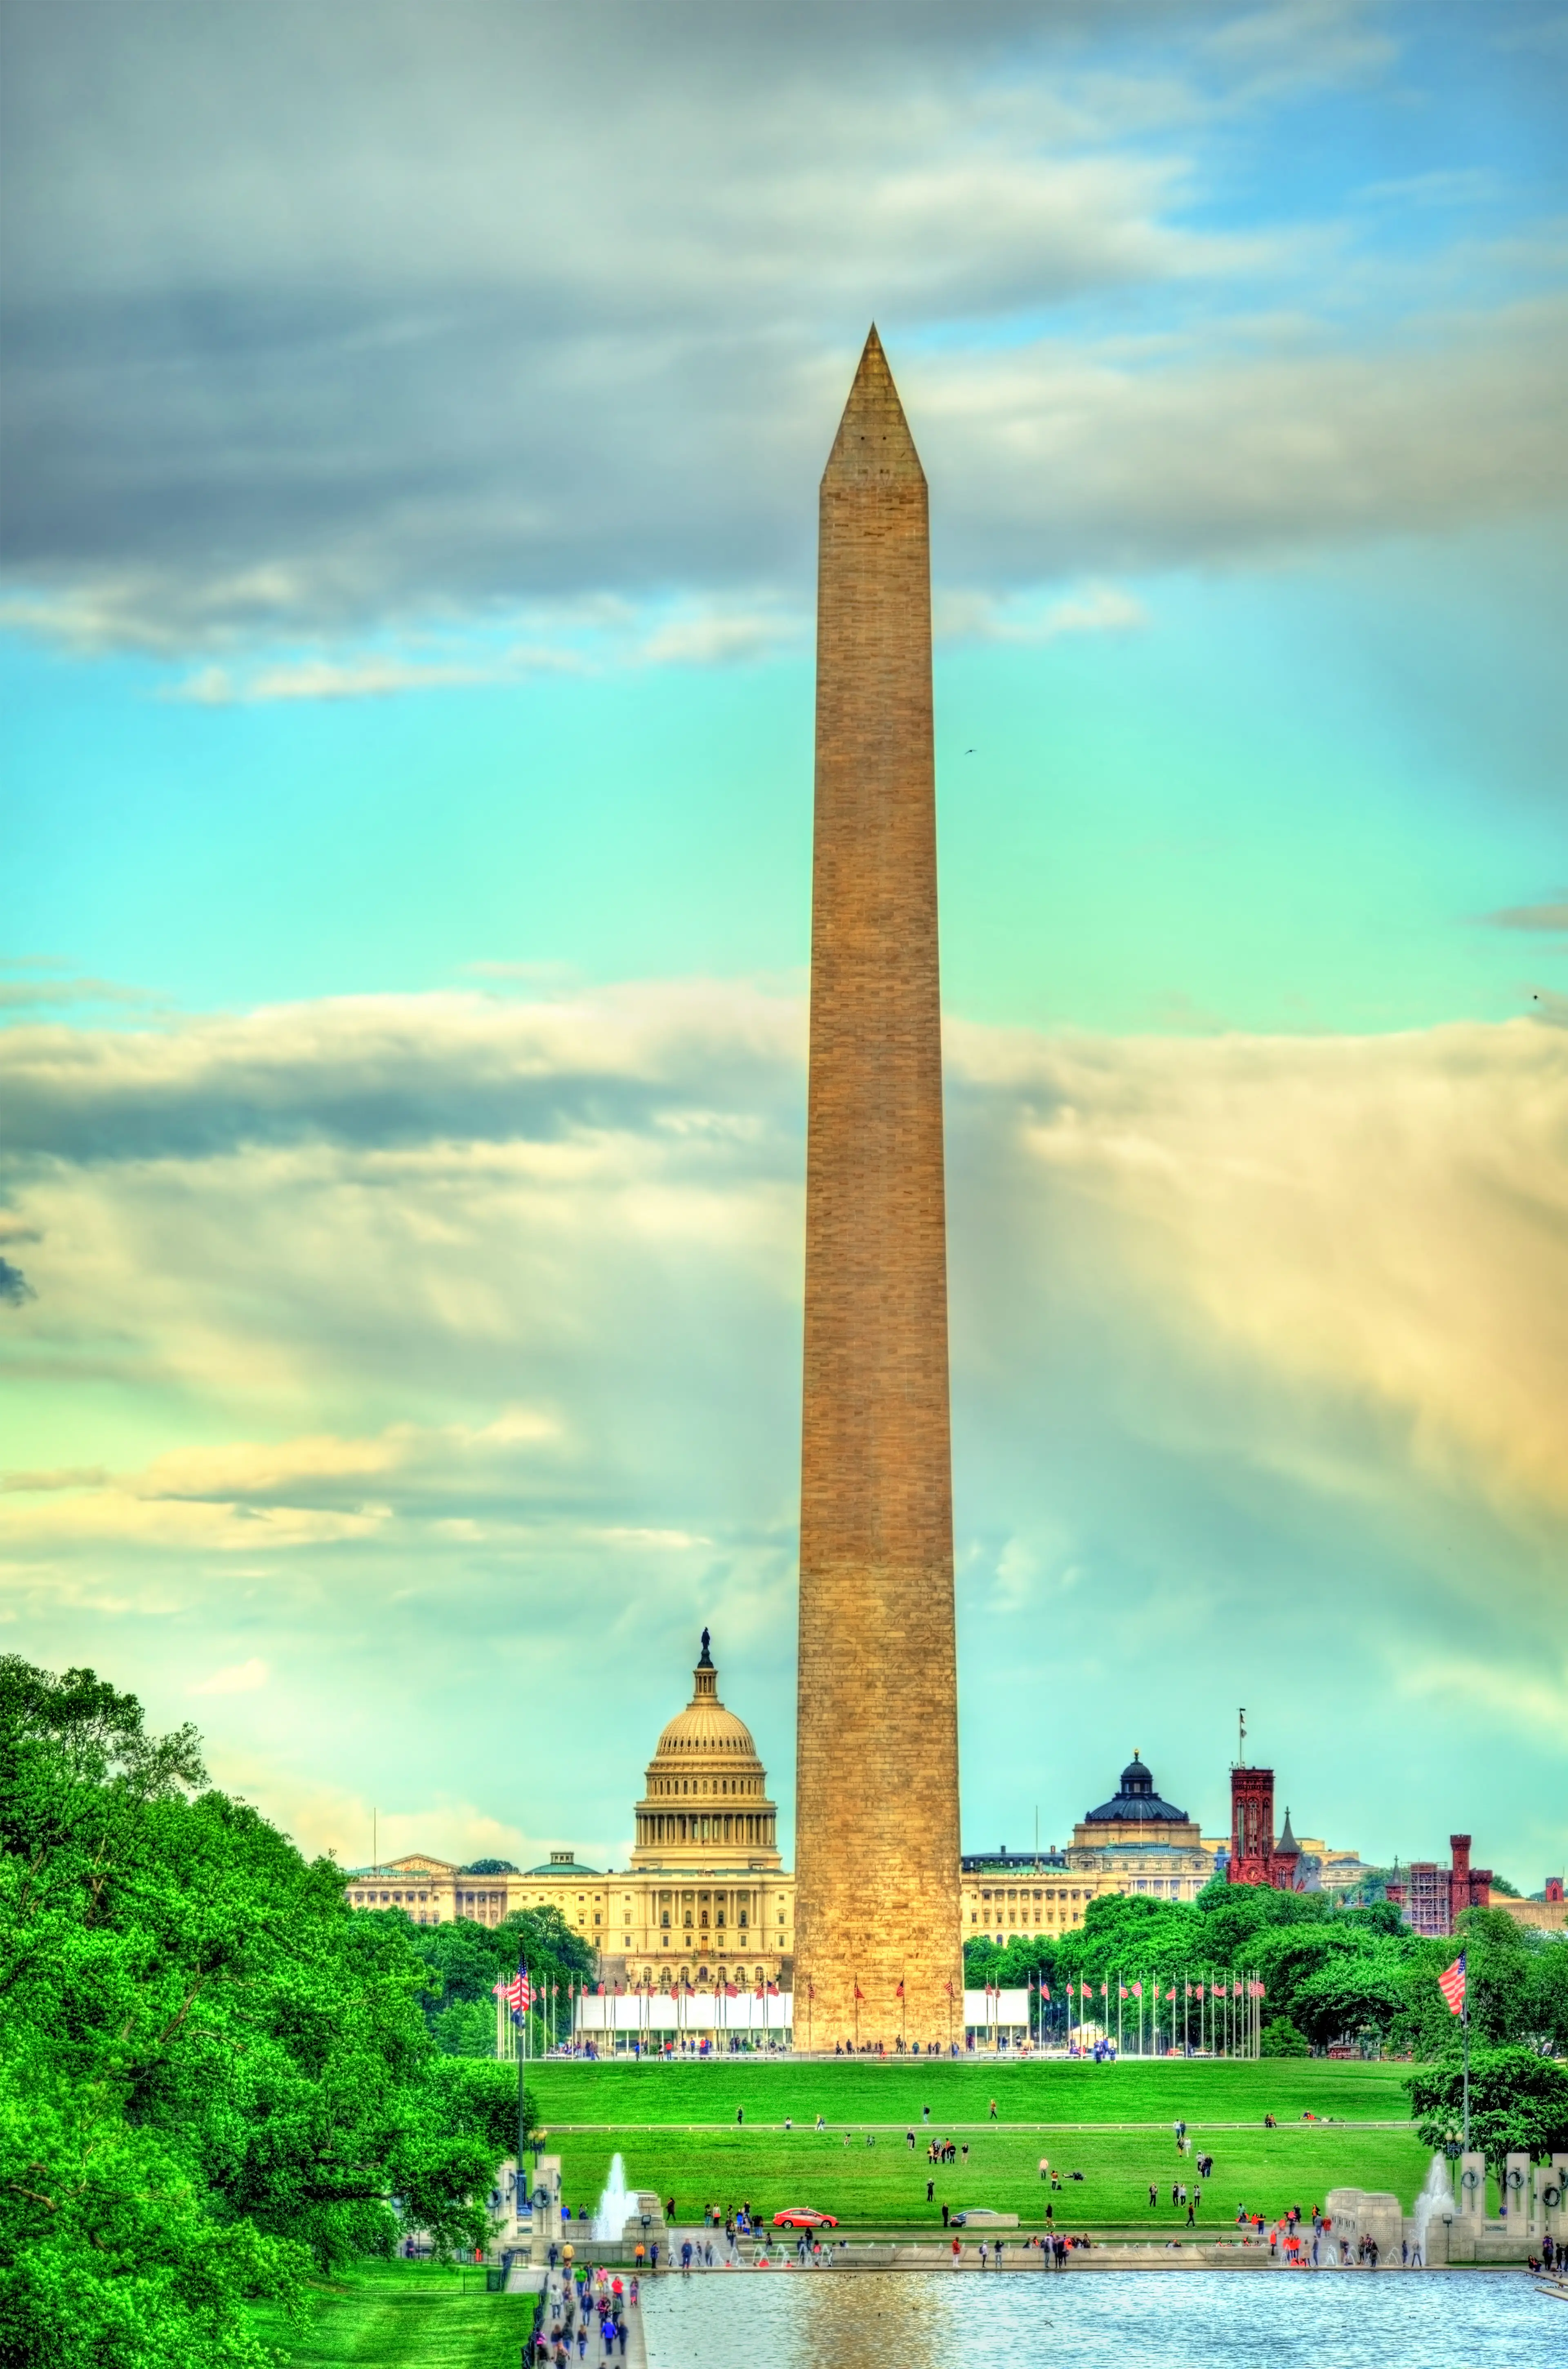 The Washington Monument and the United States Capitol on the National Mall